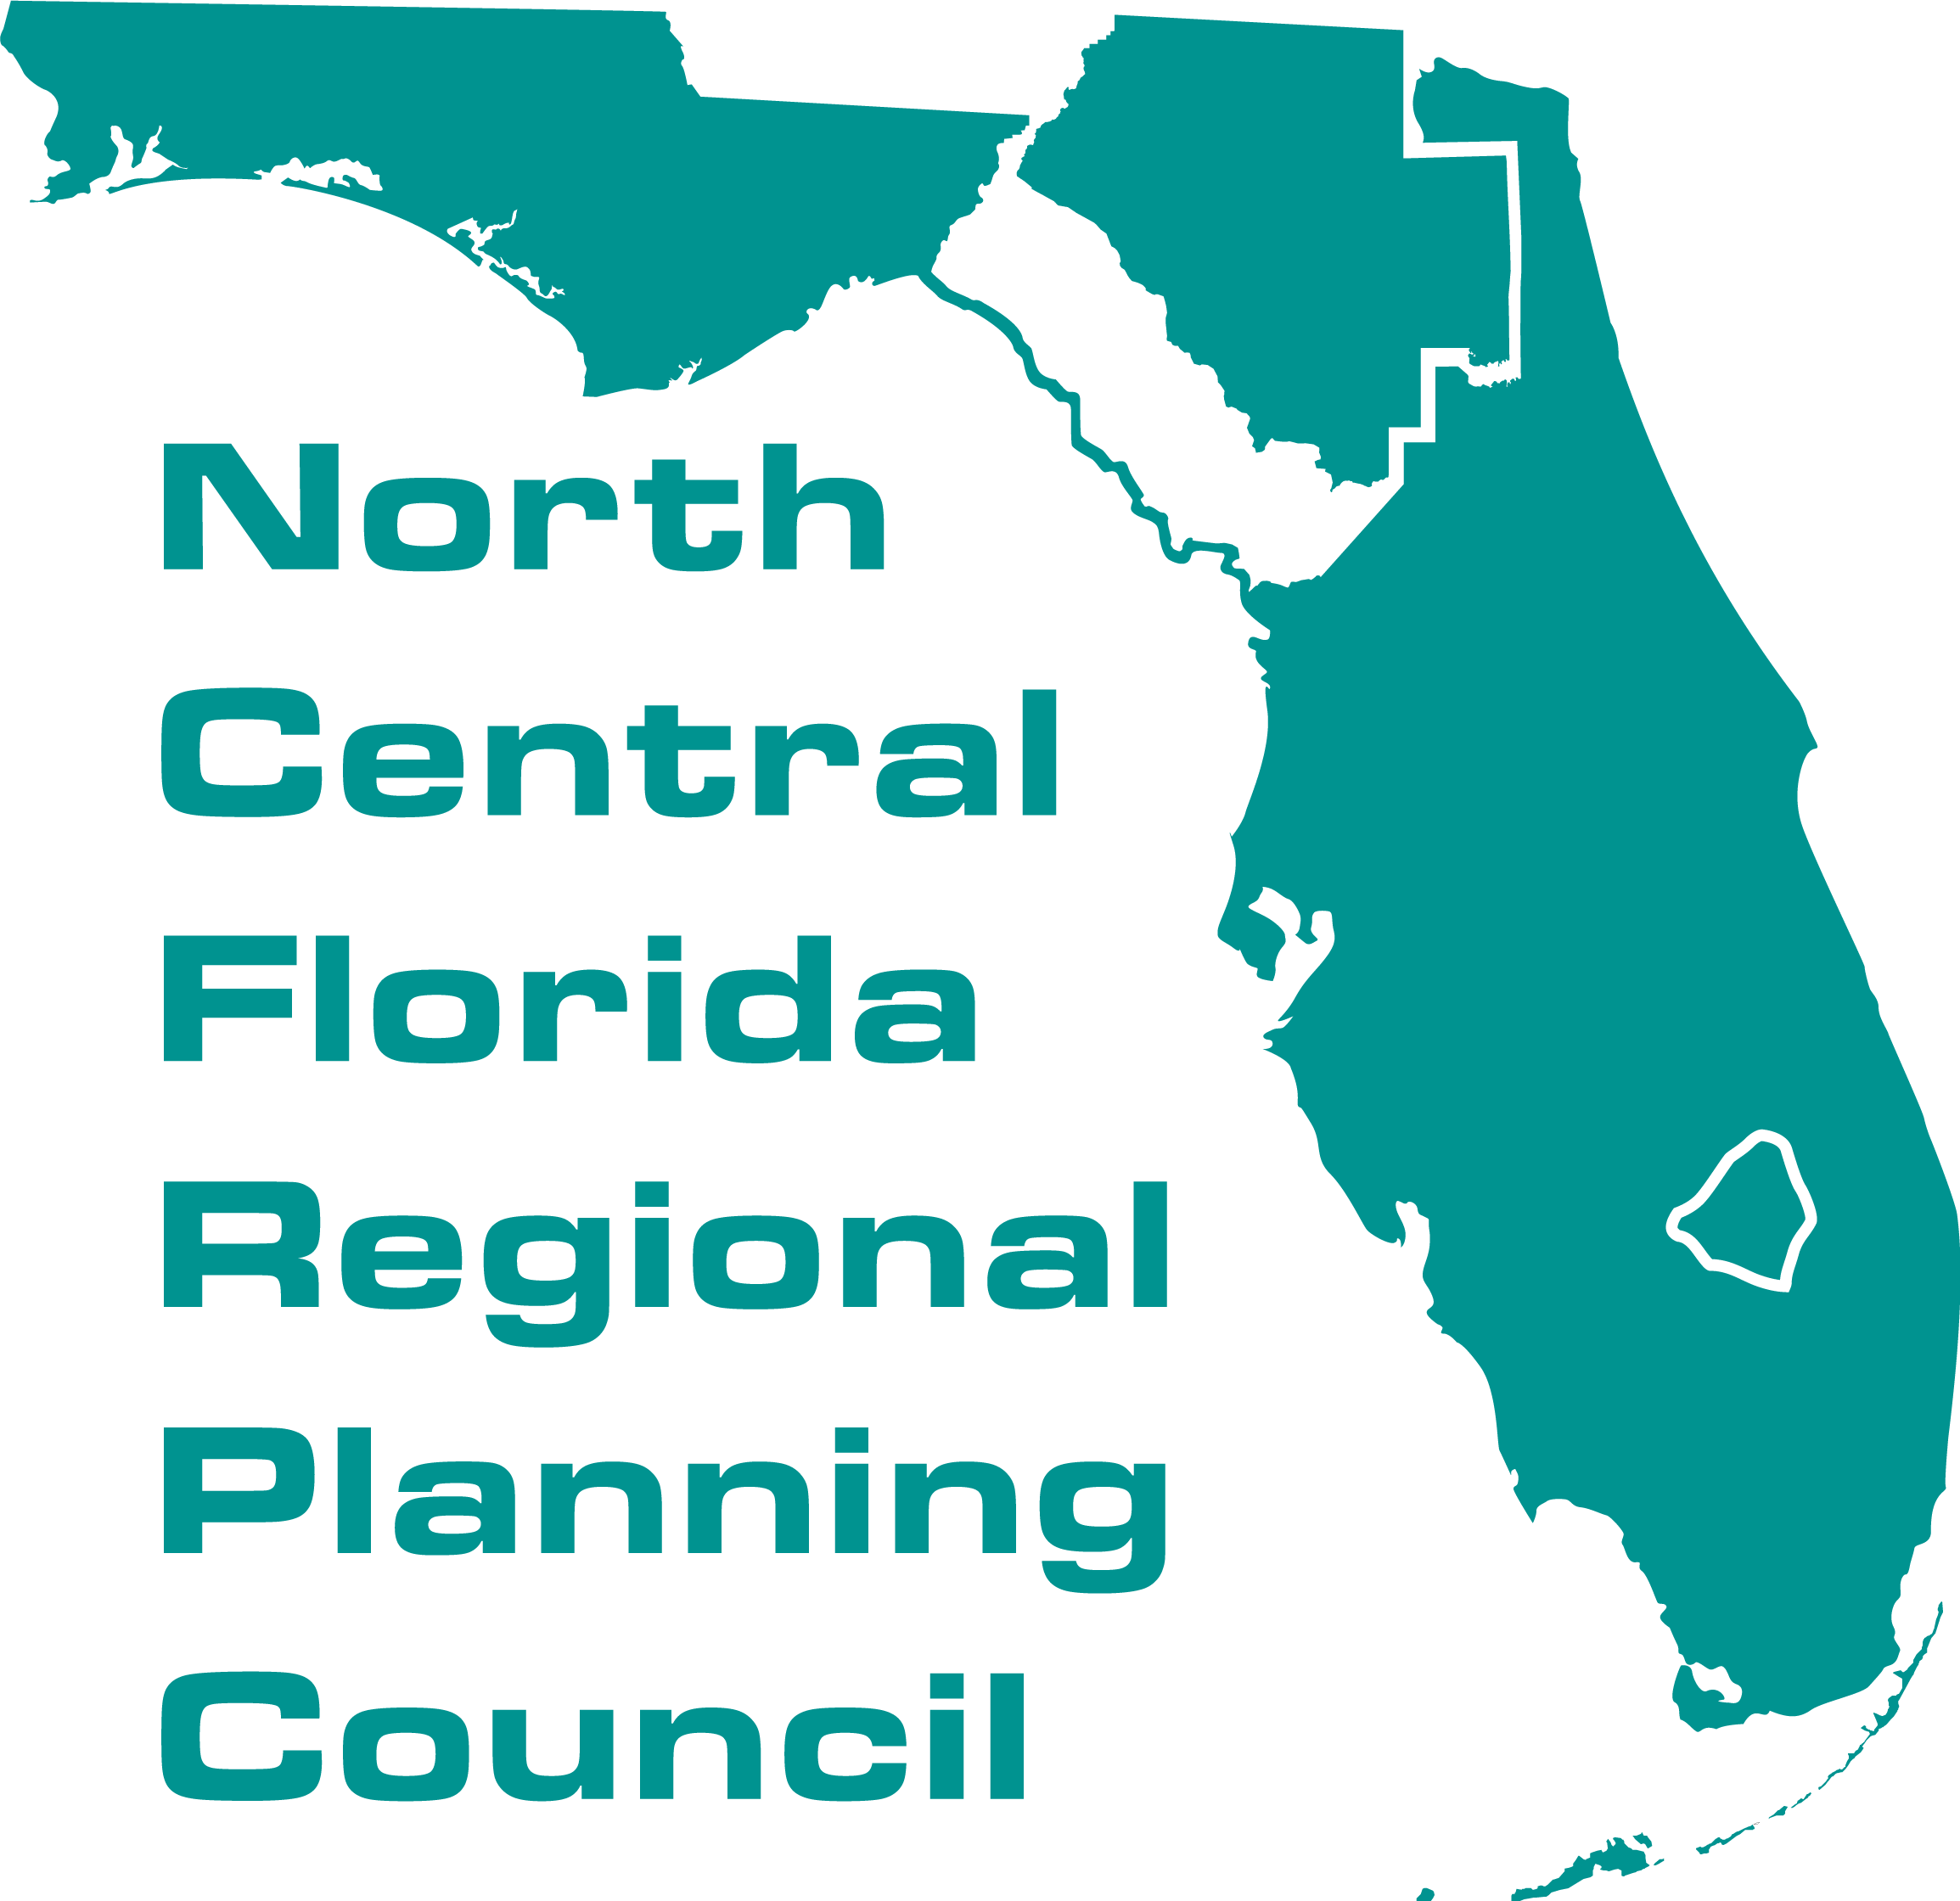 North Central Florida Regional Planning Council